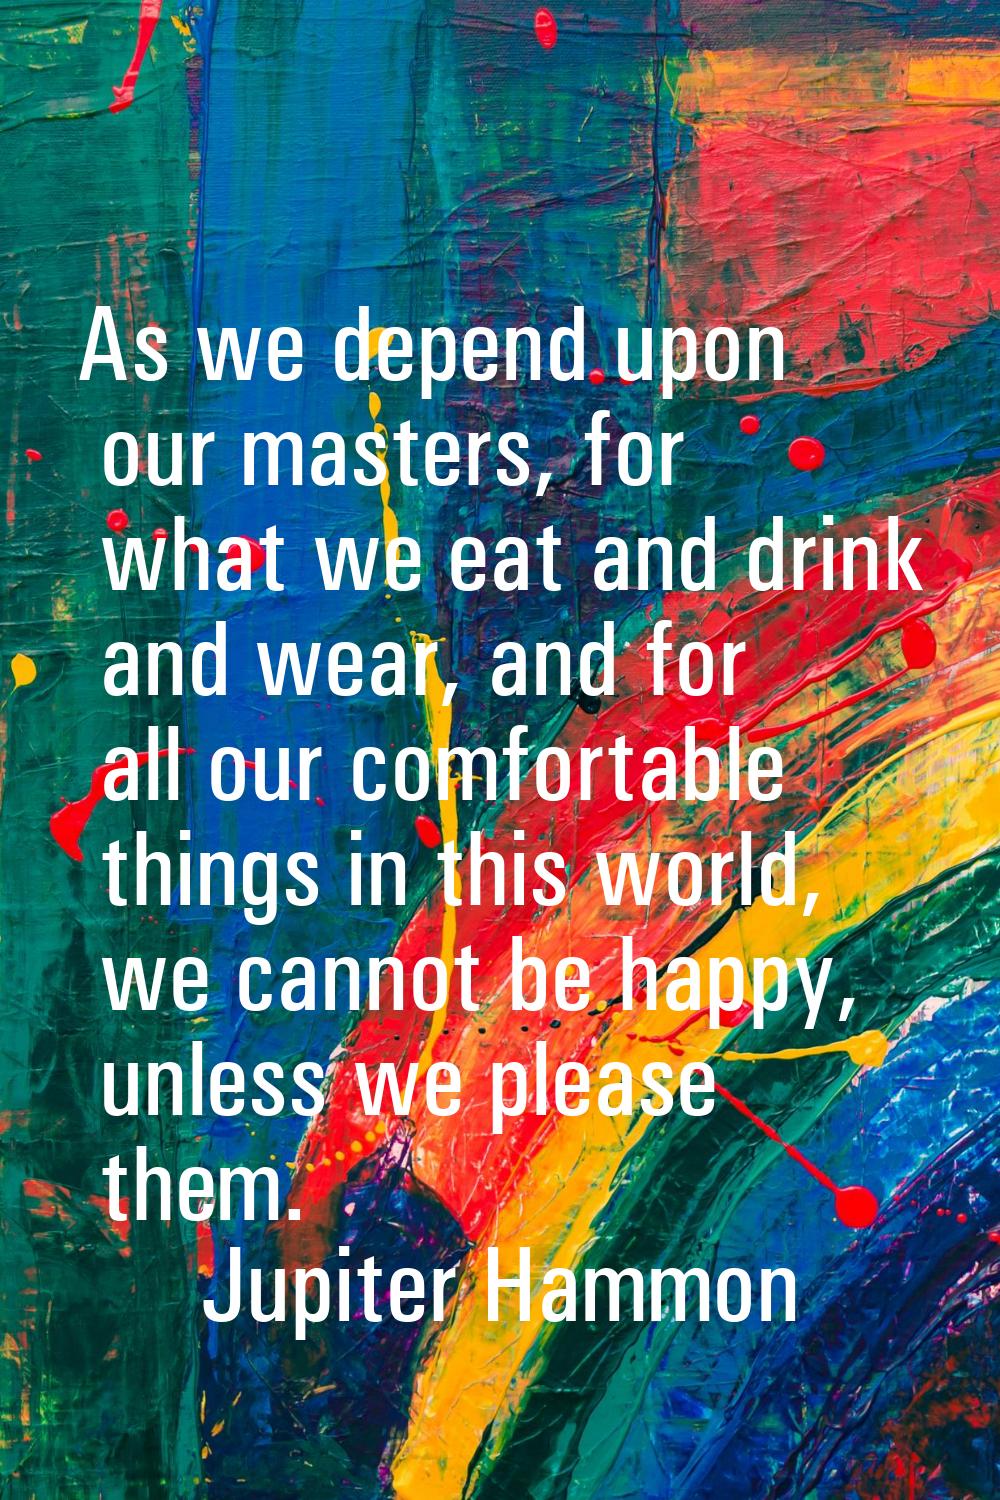 As we depend upon our masters, for what we eat and drink and wear, and for all our comfortable thin